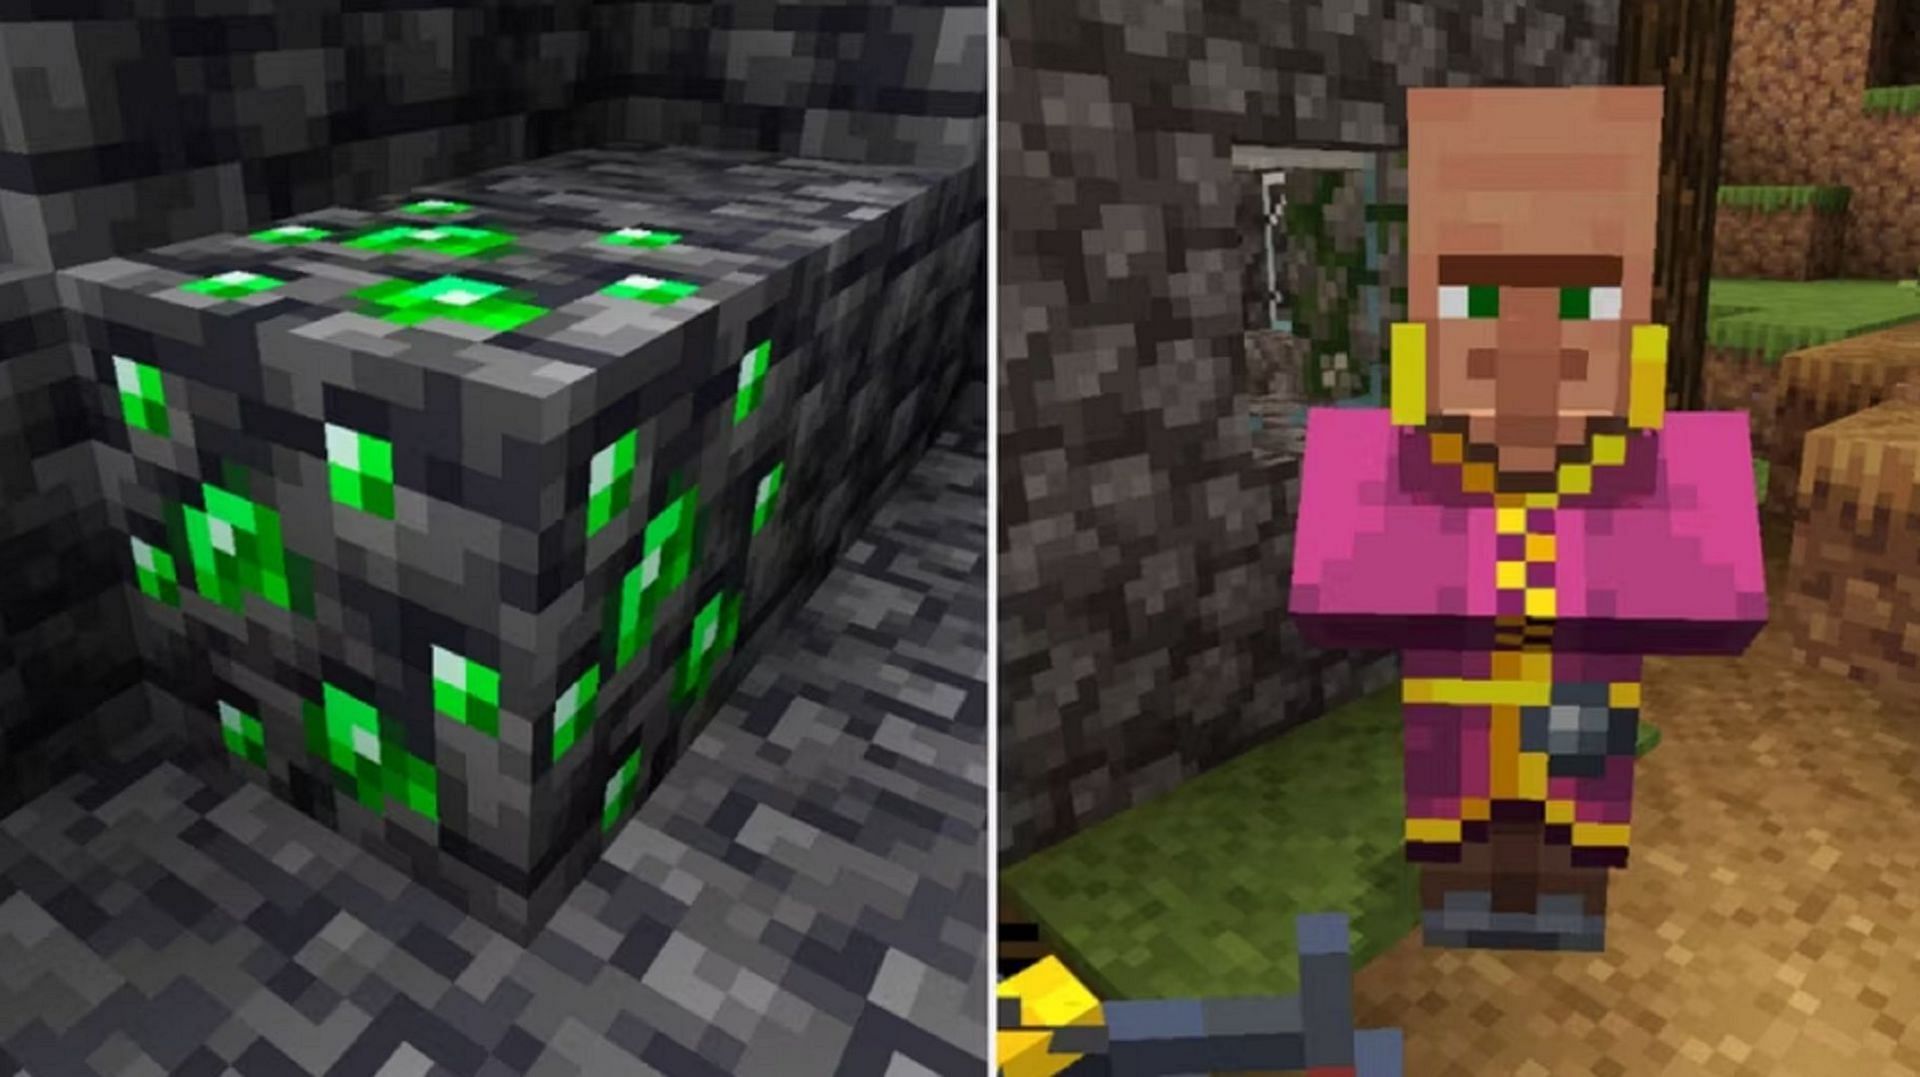 Emeralds can be mined, looted, and traded for in Minecraft (Image via Mojang)